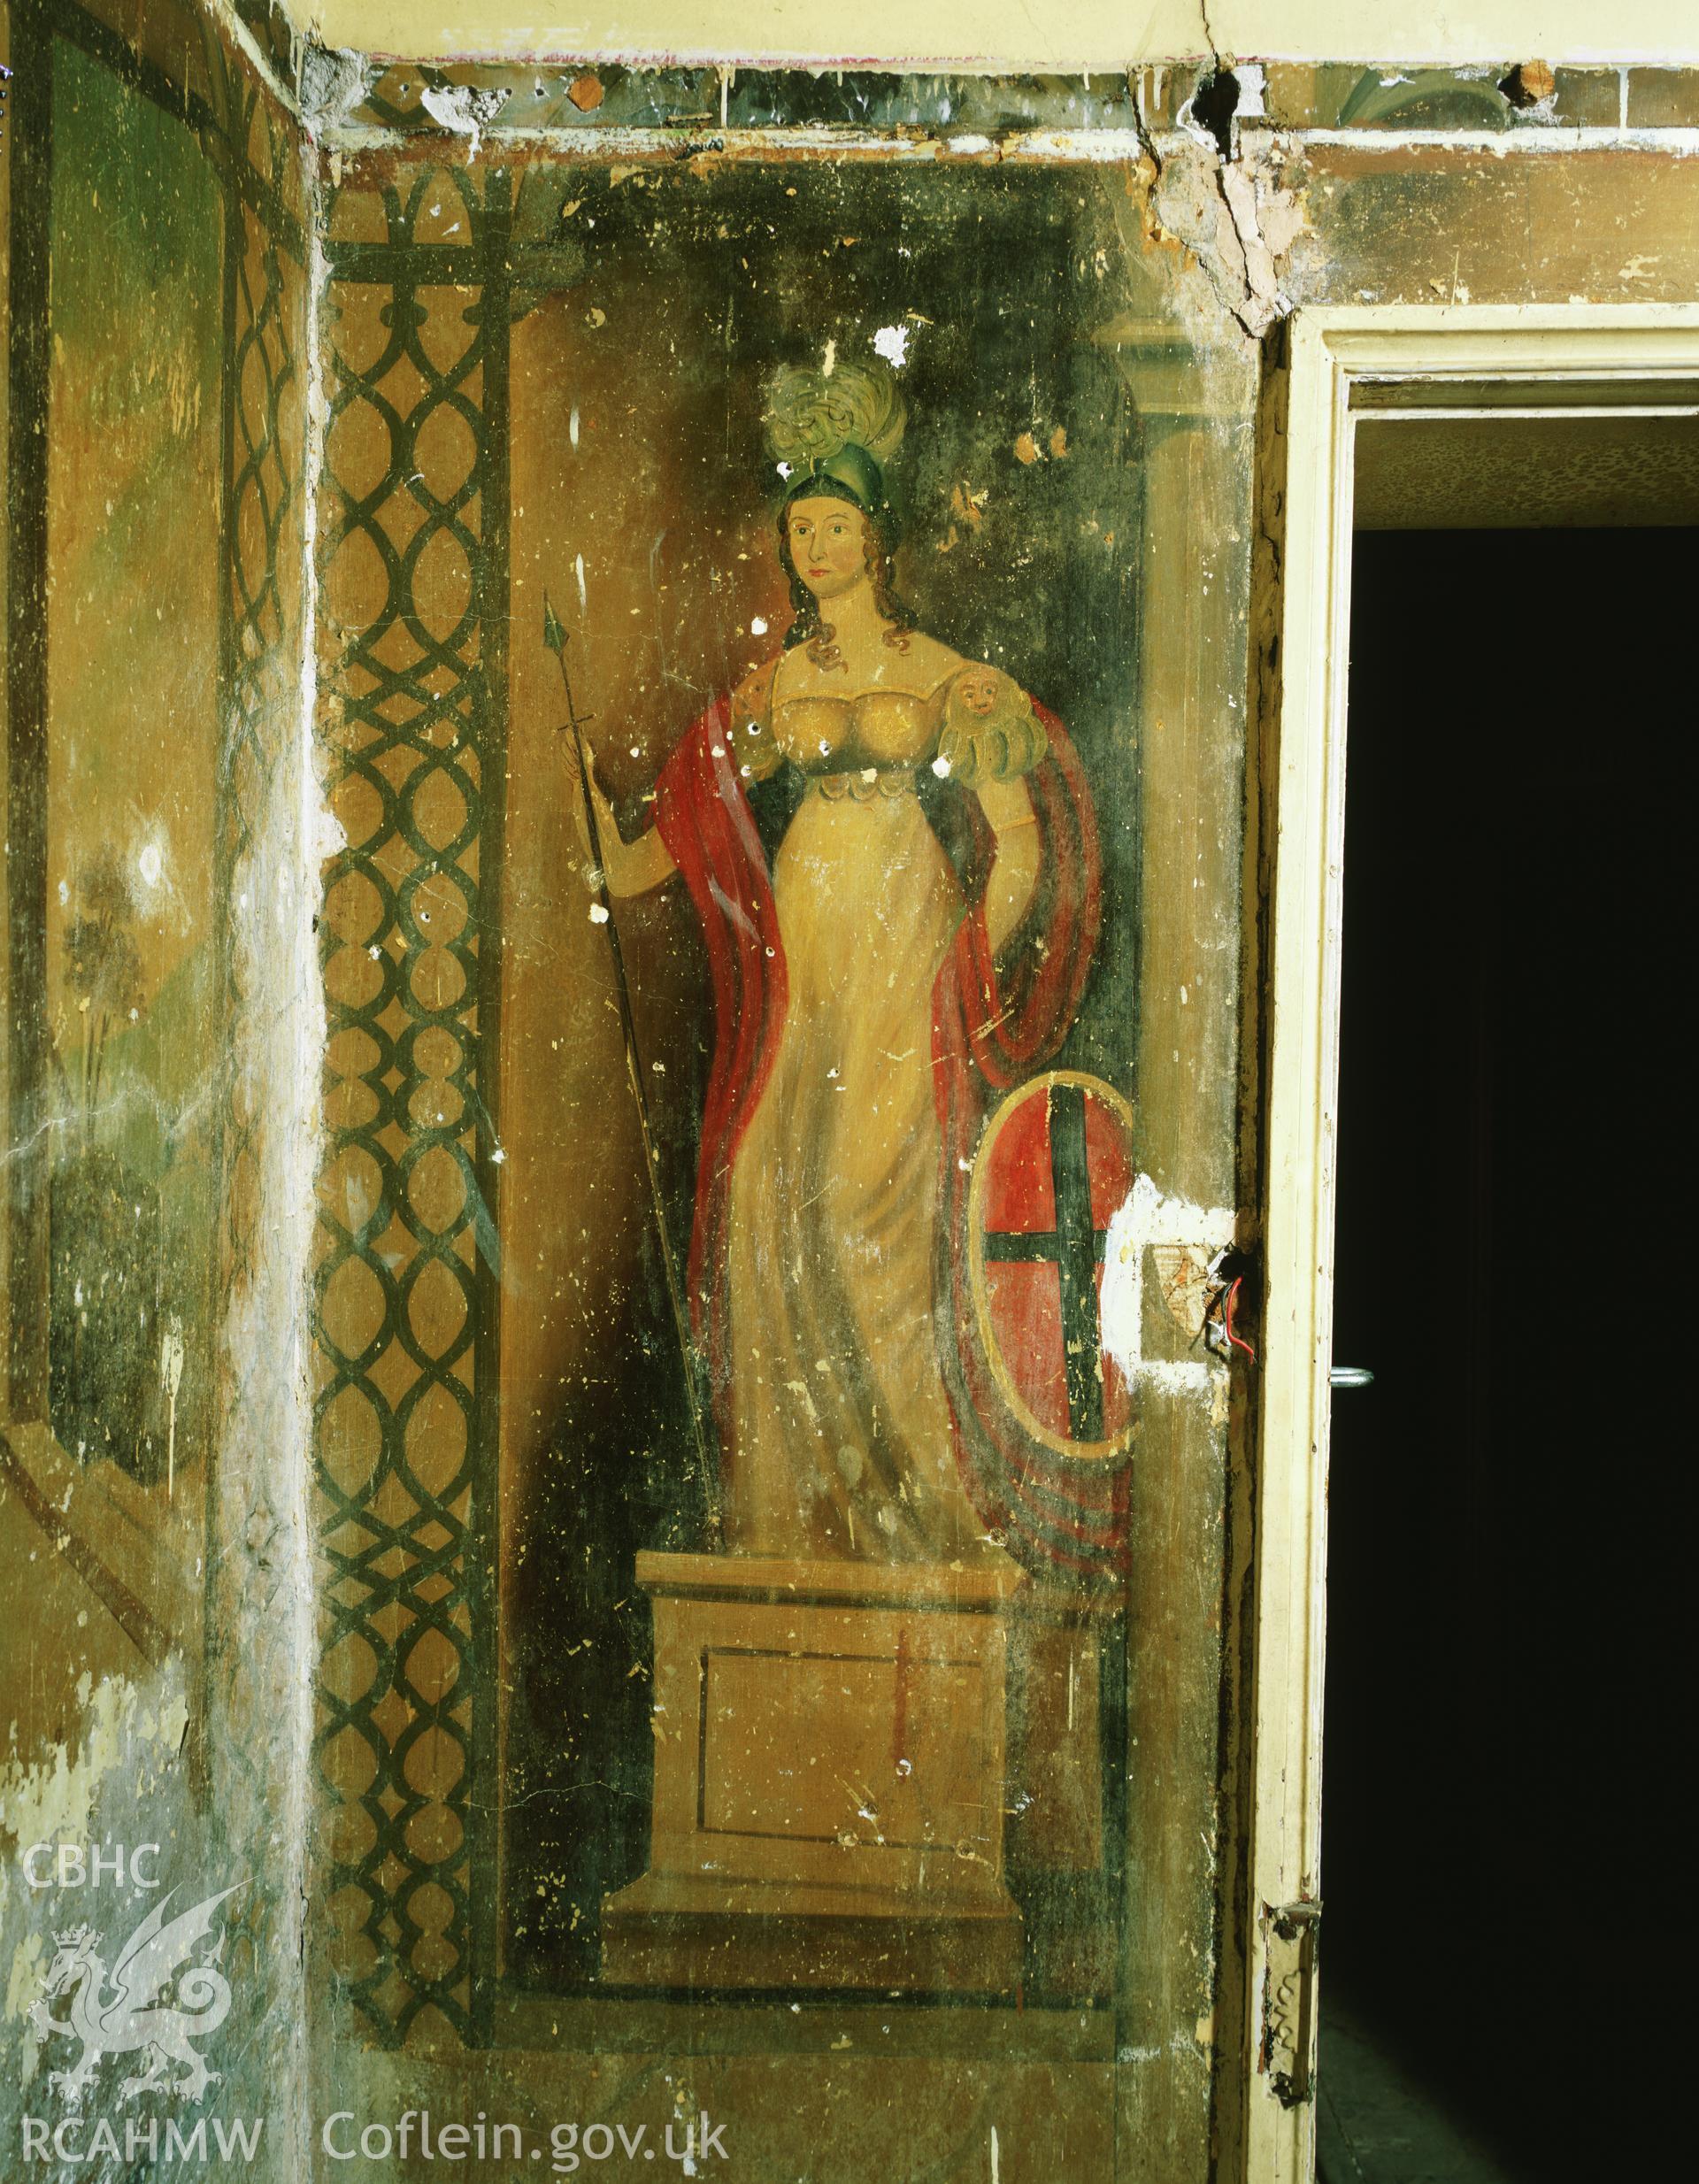 RCAHMW colour transparency showing Britannia wallpainting at Elwy Bank, St Asaph, photographed by Iain Wright, November 2003.